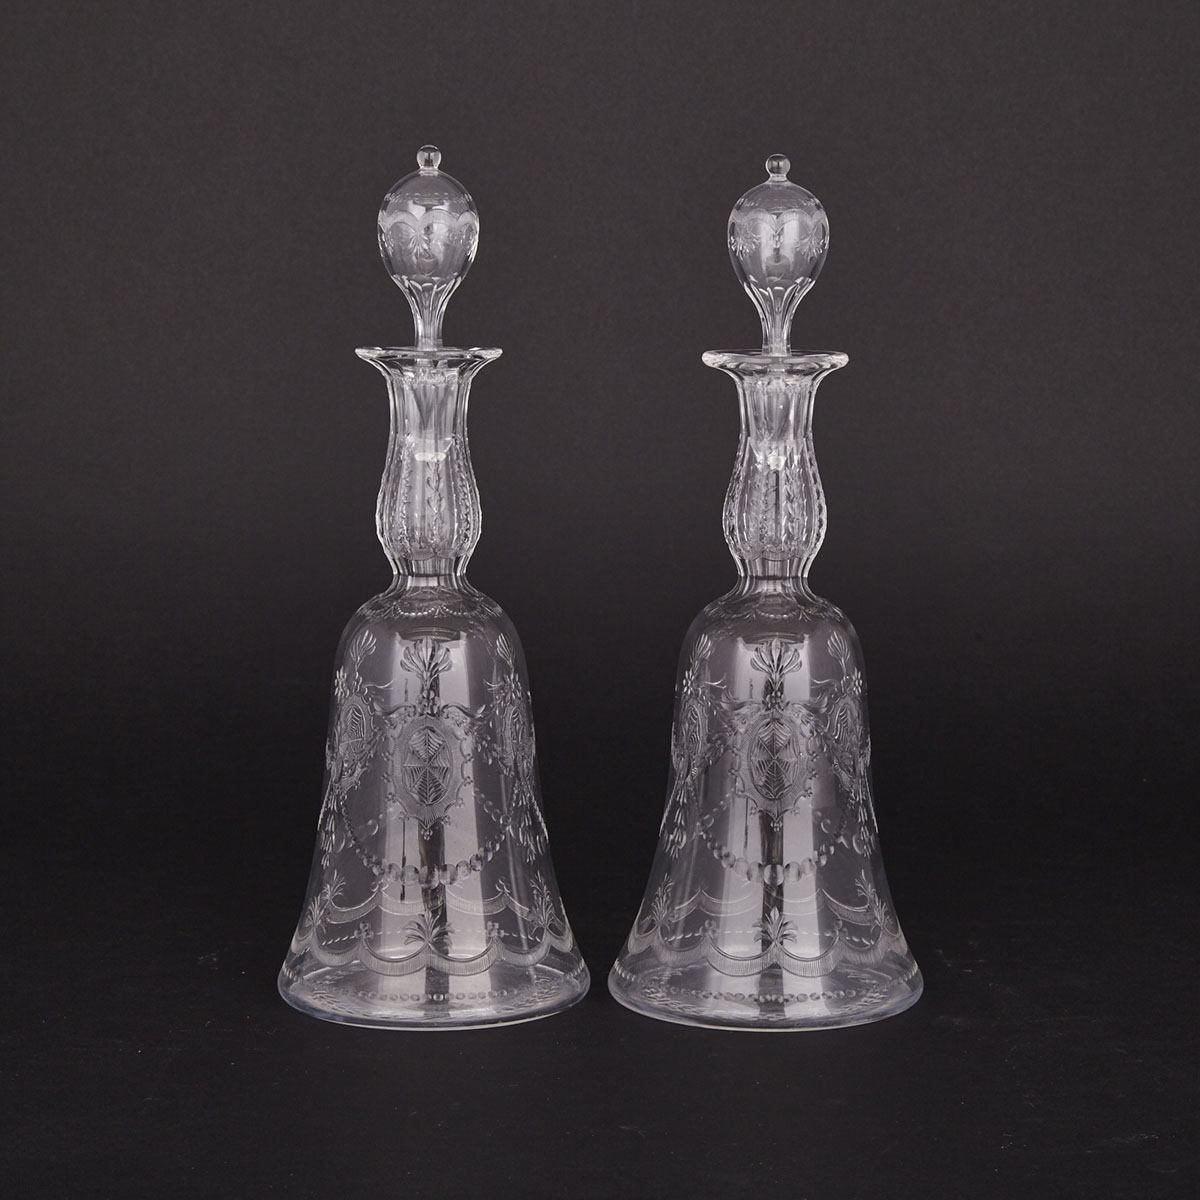 Pair of English Engraved Glass Decanters, early 20th century